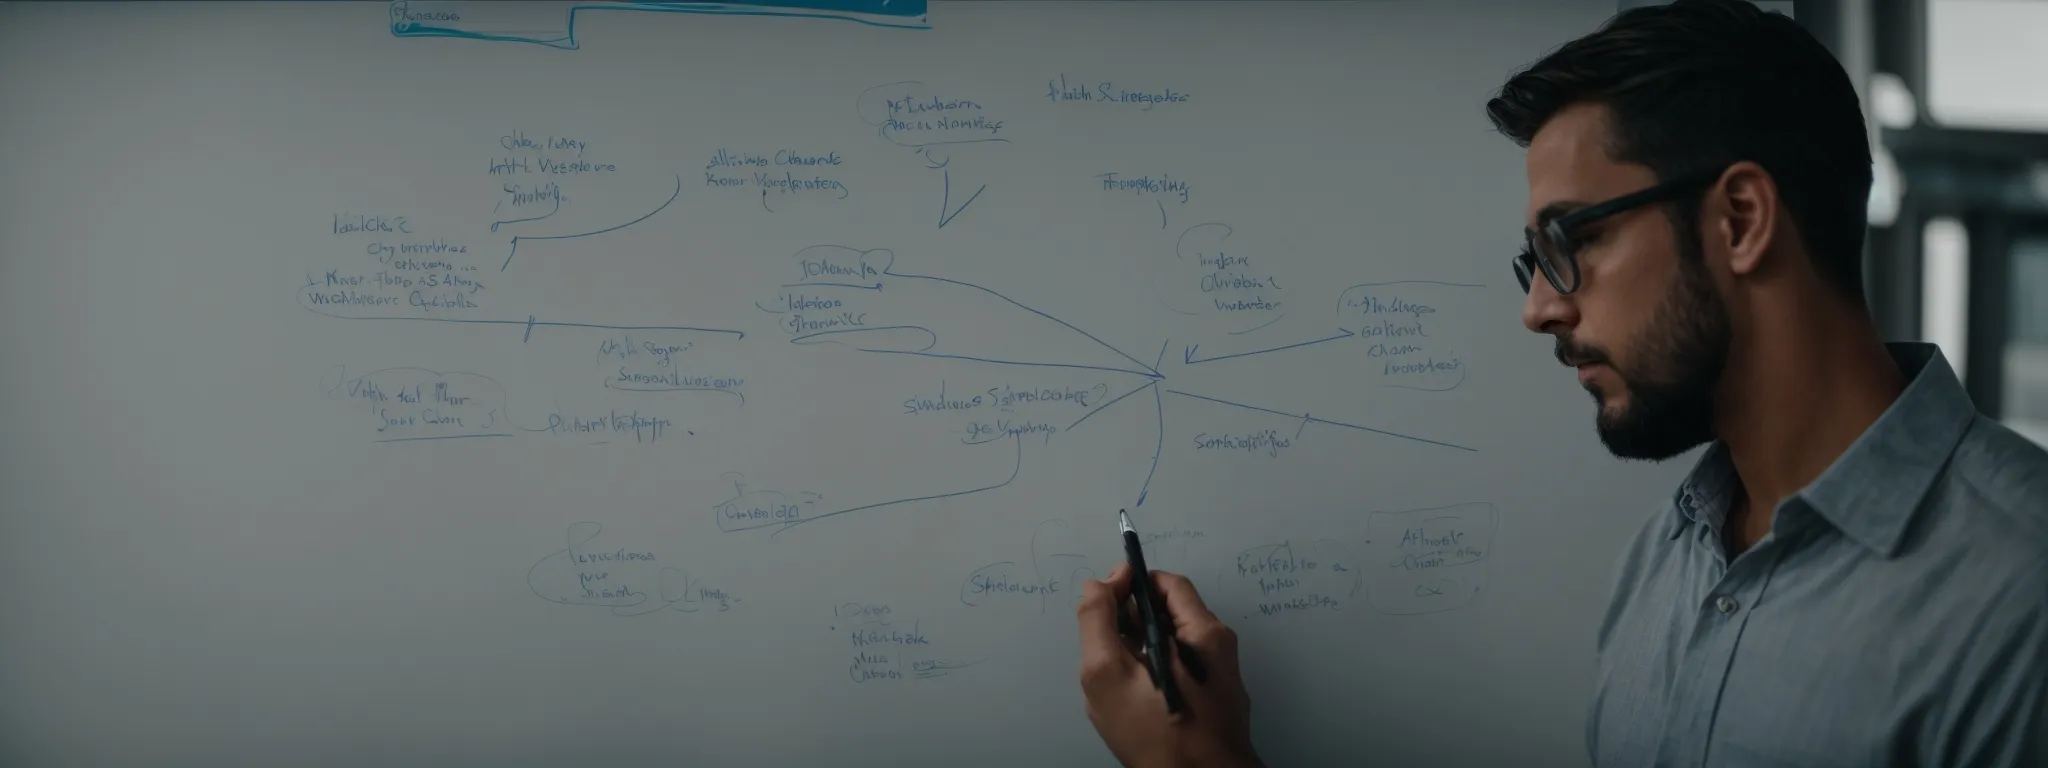 a marketer plots a keyword strategy on a whiteboard, sketching out a plan to enhance a brand's online visibility.